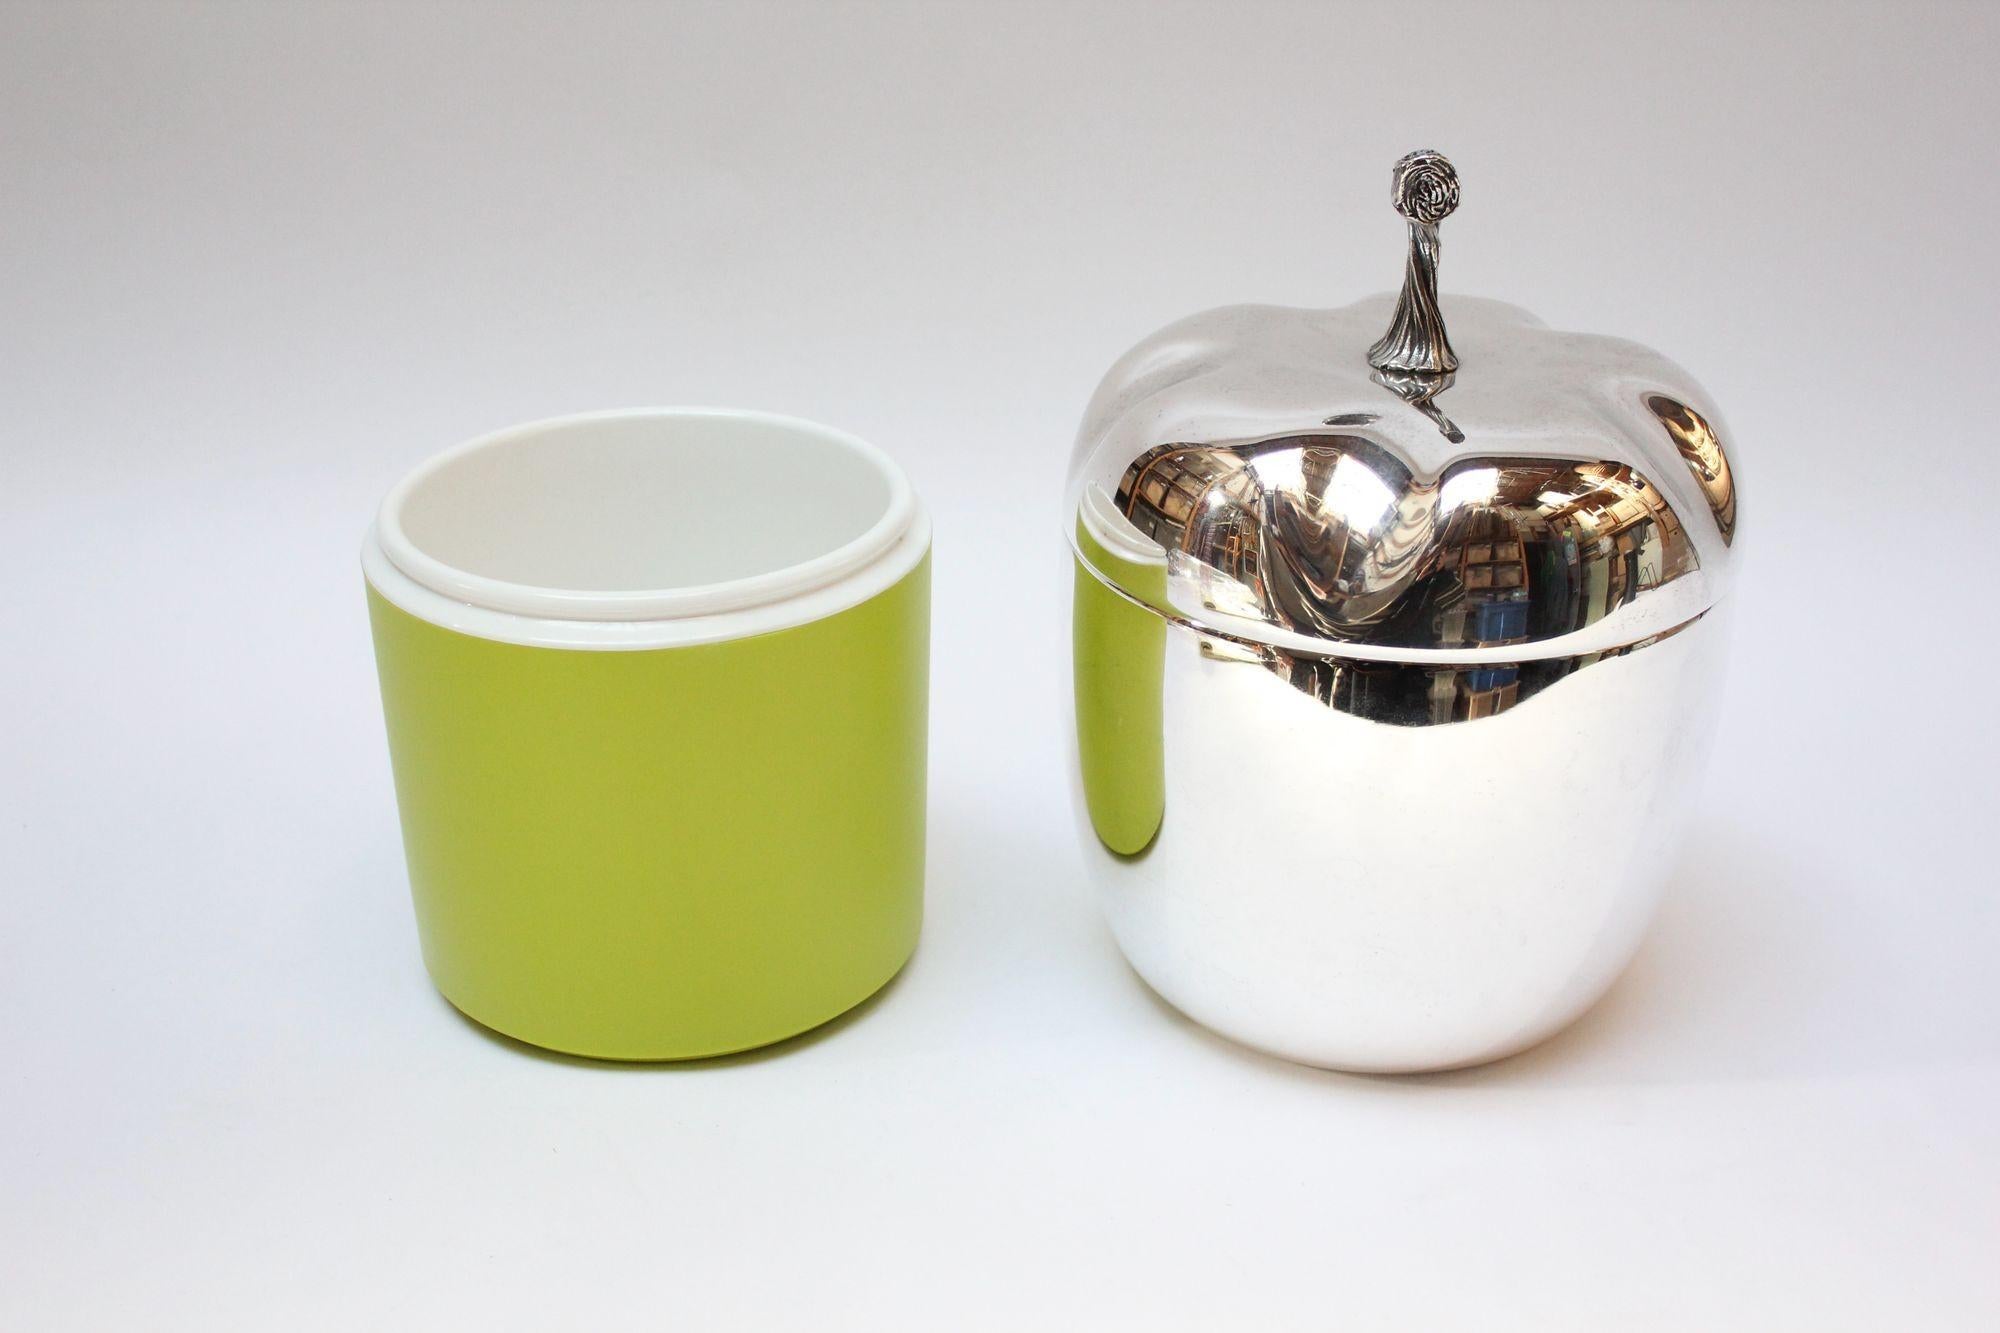 Charming Mid-Century Italian Modern ice bucket resembling both a bell pepper and an acorn with silver plate exterior and neon green plastic interior. 
Features a heavily textured, sculptural stem that serves as the handle for removing the top.